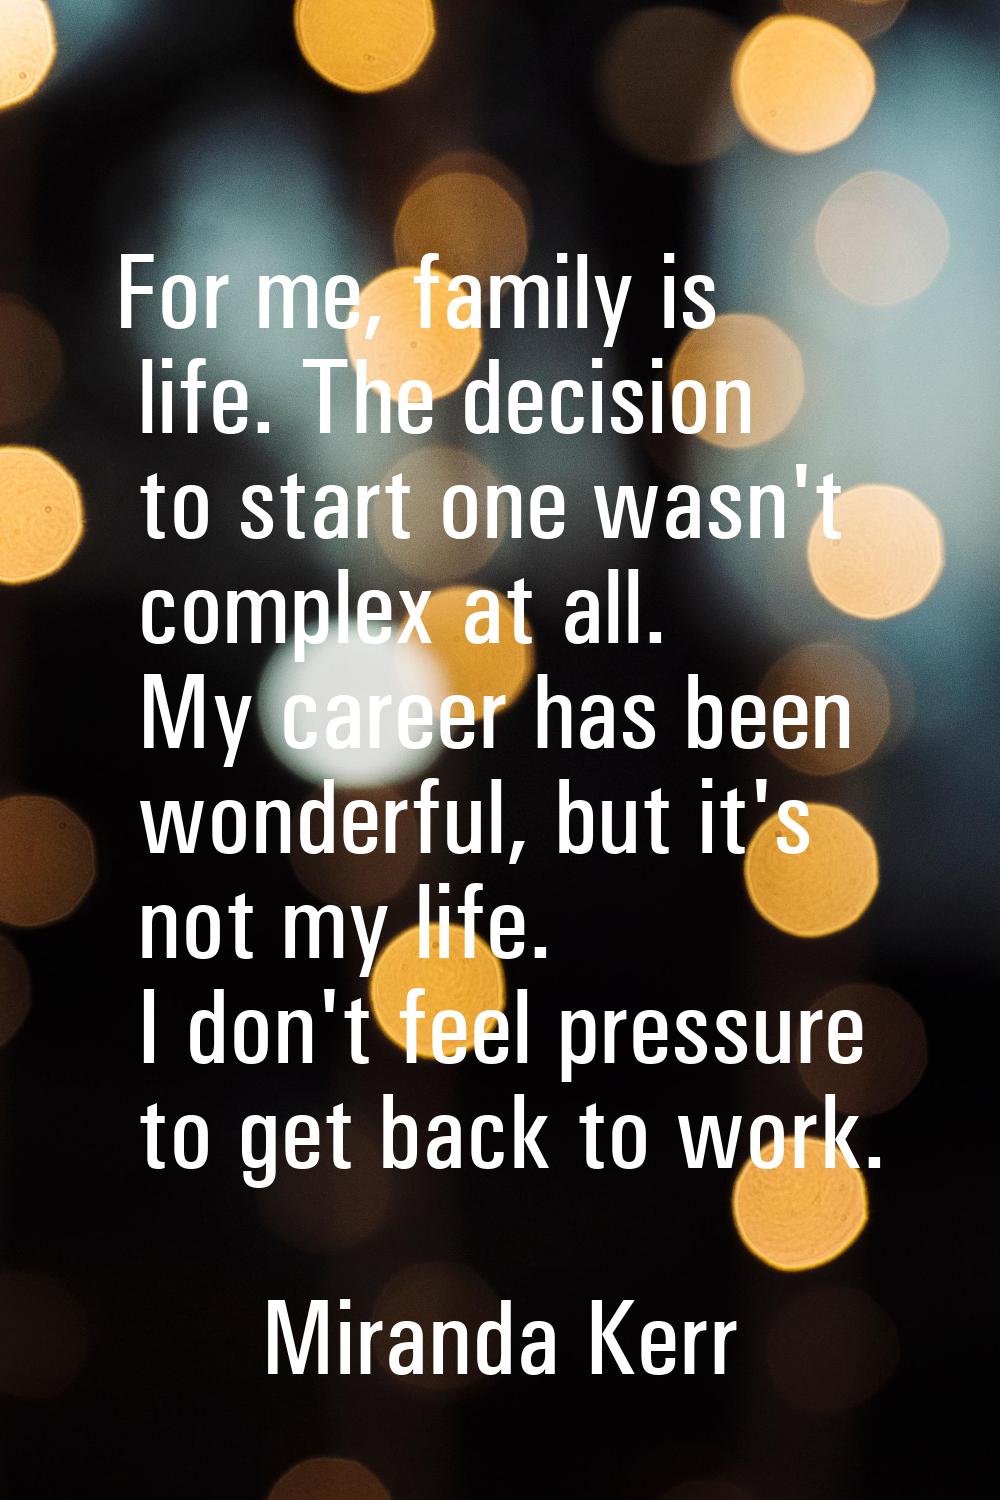 For me, family is life. The decision to start one wasn't complex at all. My career has been wonderf